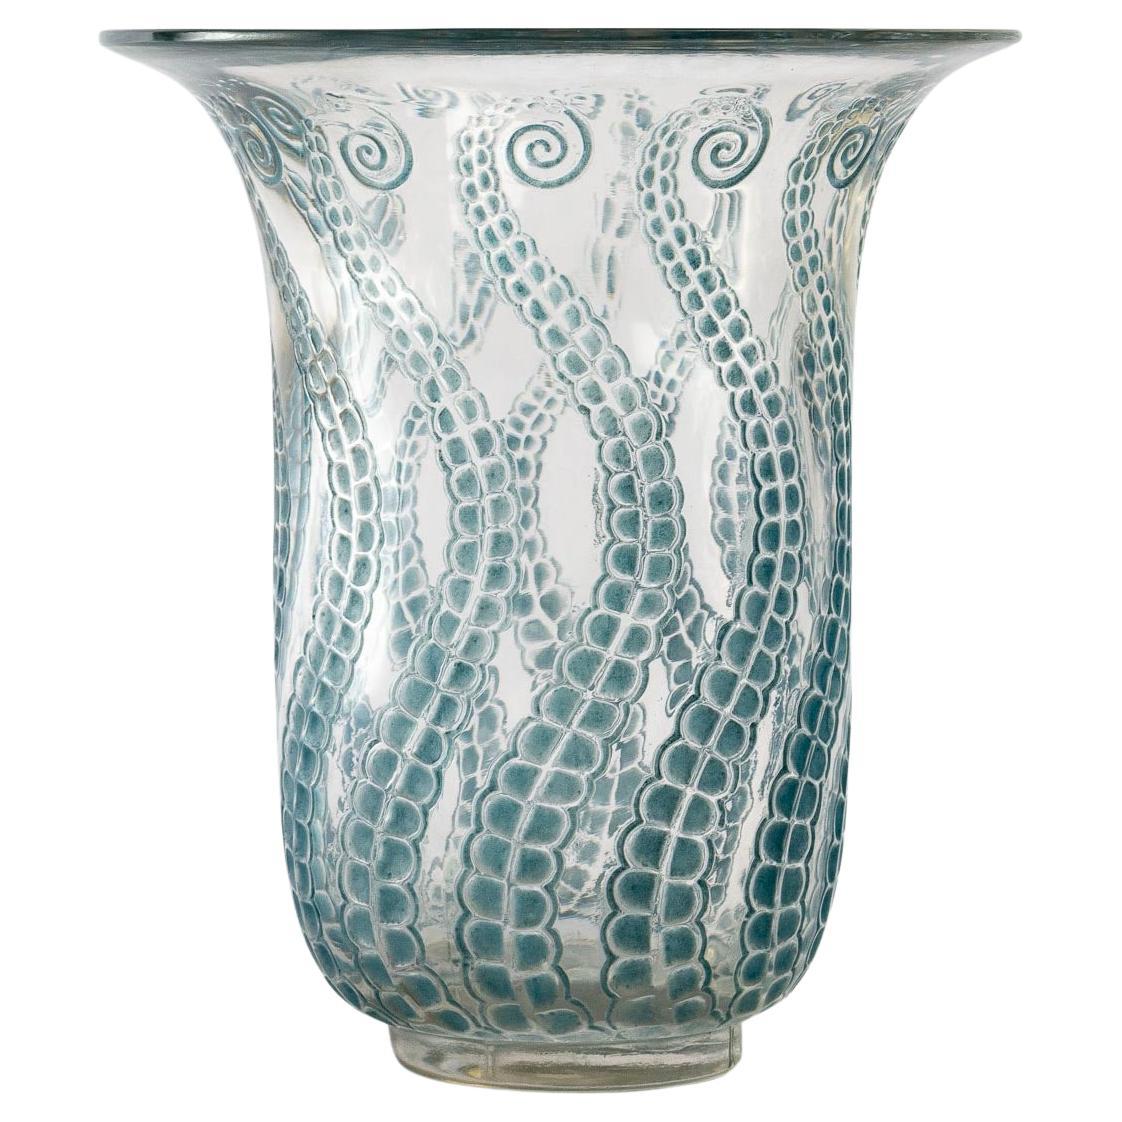 1921 René Lalique Meduse Vase in Clear Glass with Blue Patina